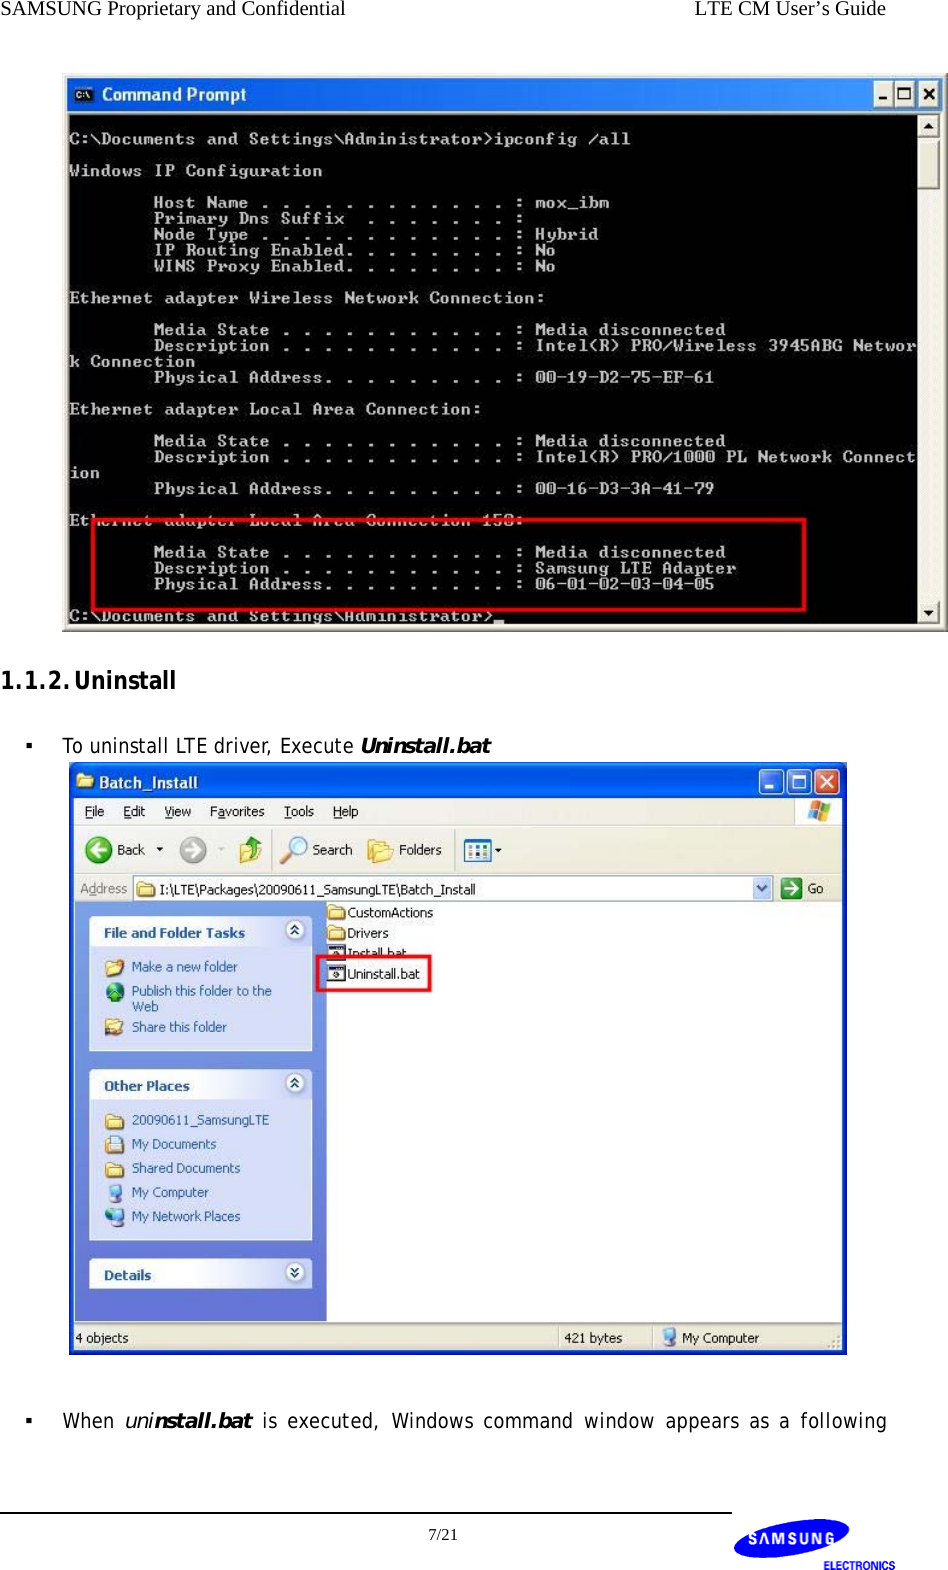 SAMSUNG Proprietary and Confidential    LTE CM User’s Guide  1.1.2. Uninstall ▪ To uninstall LTE driver, Execute Uninstall.bat   ▪ When uninstall.bat  is executed, Windows command window appears as a following  7/21  